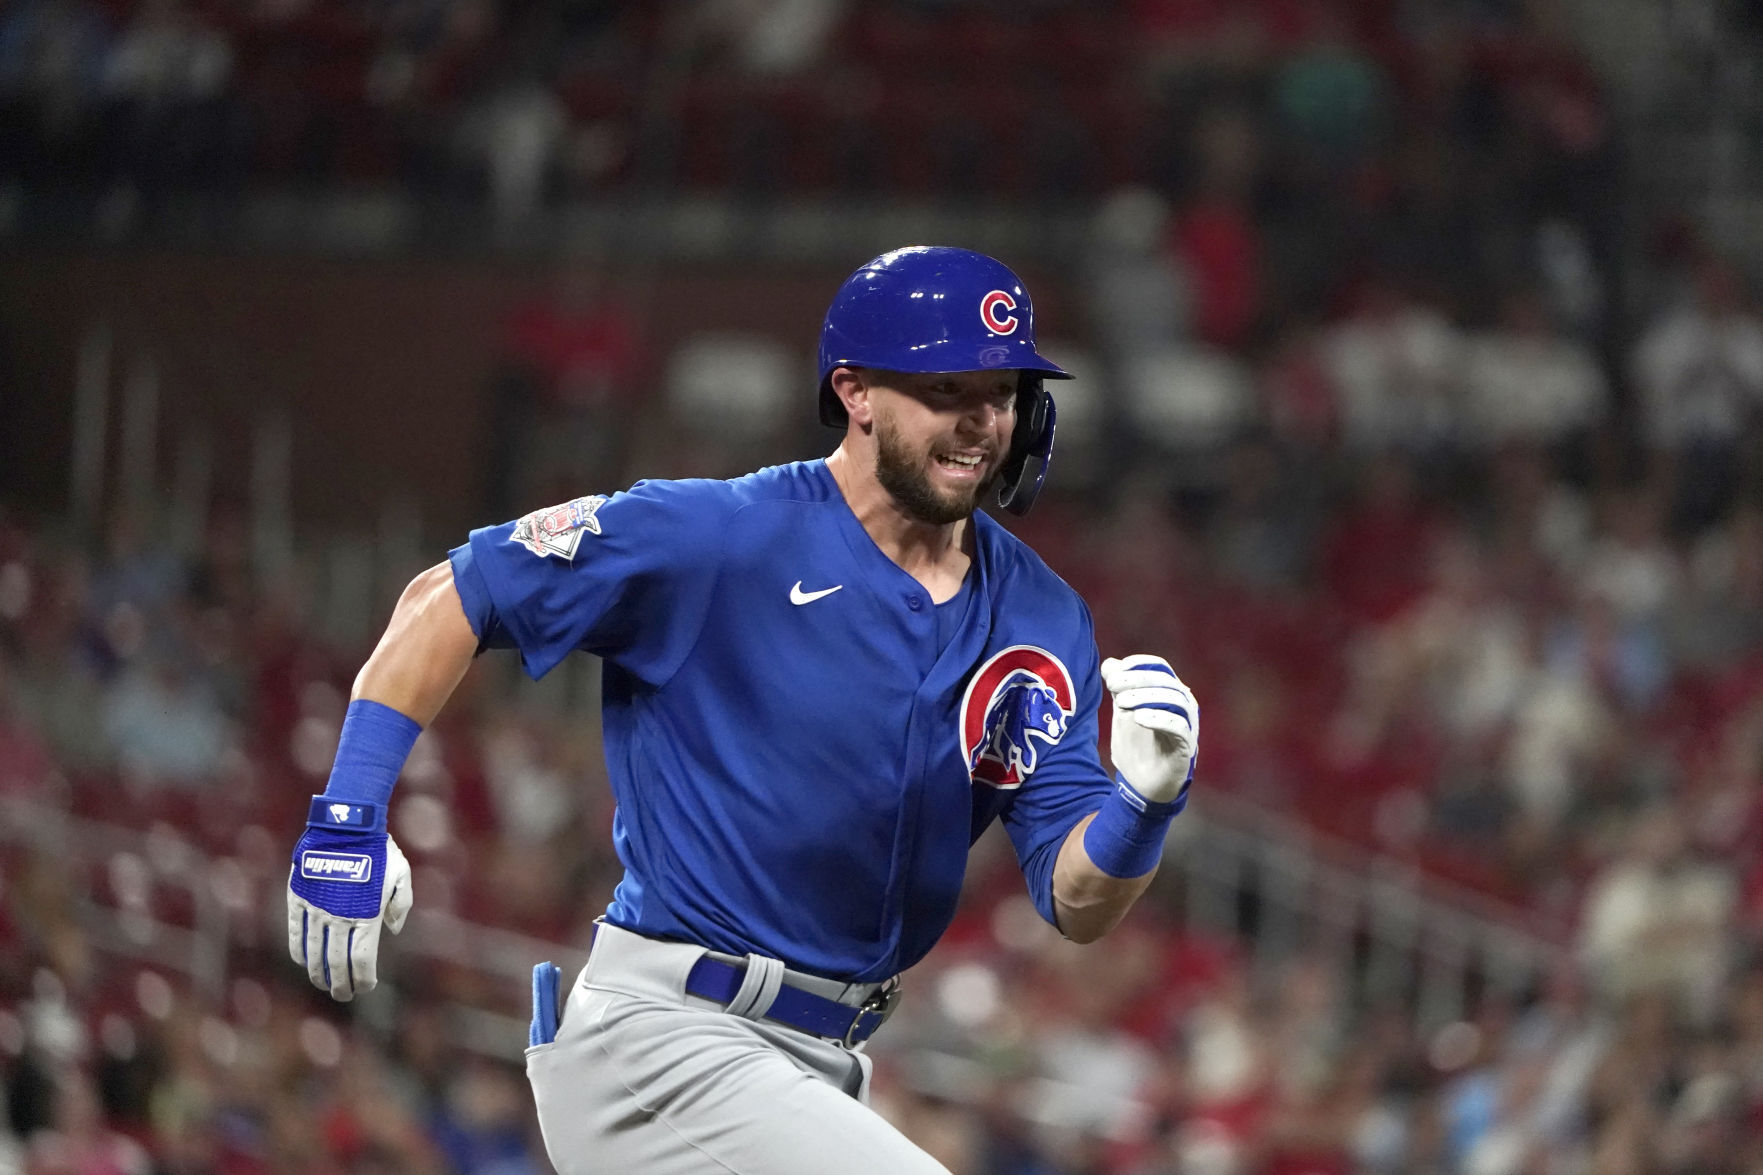 For Chicago Cubs Trent Giambrone, debut came at end of tough year